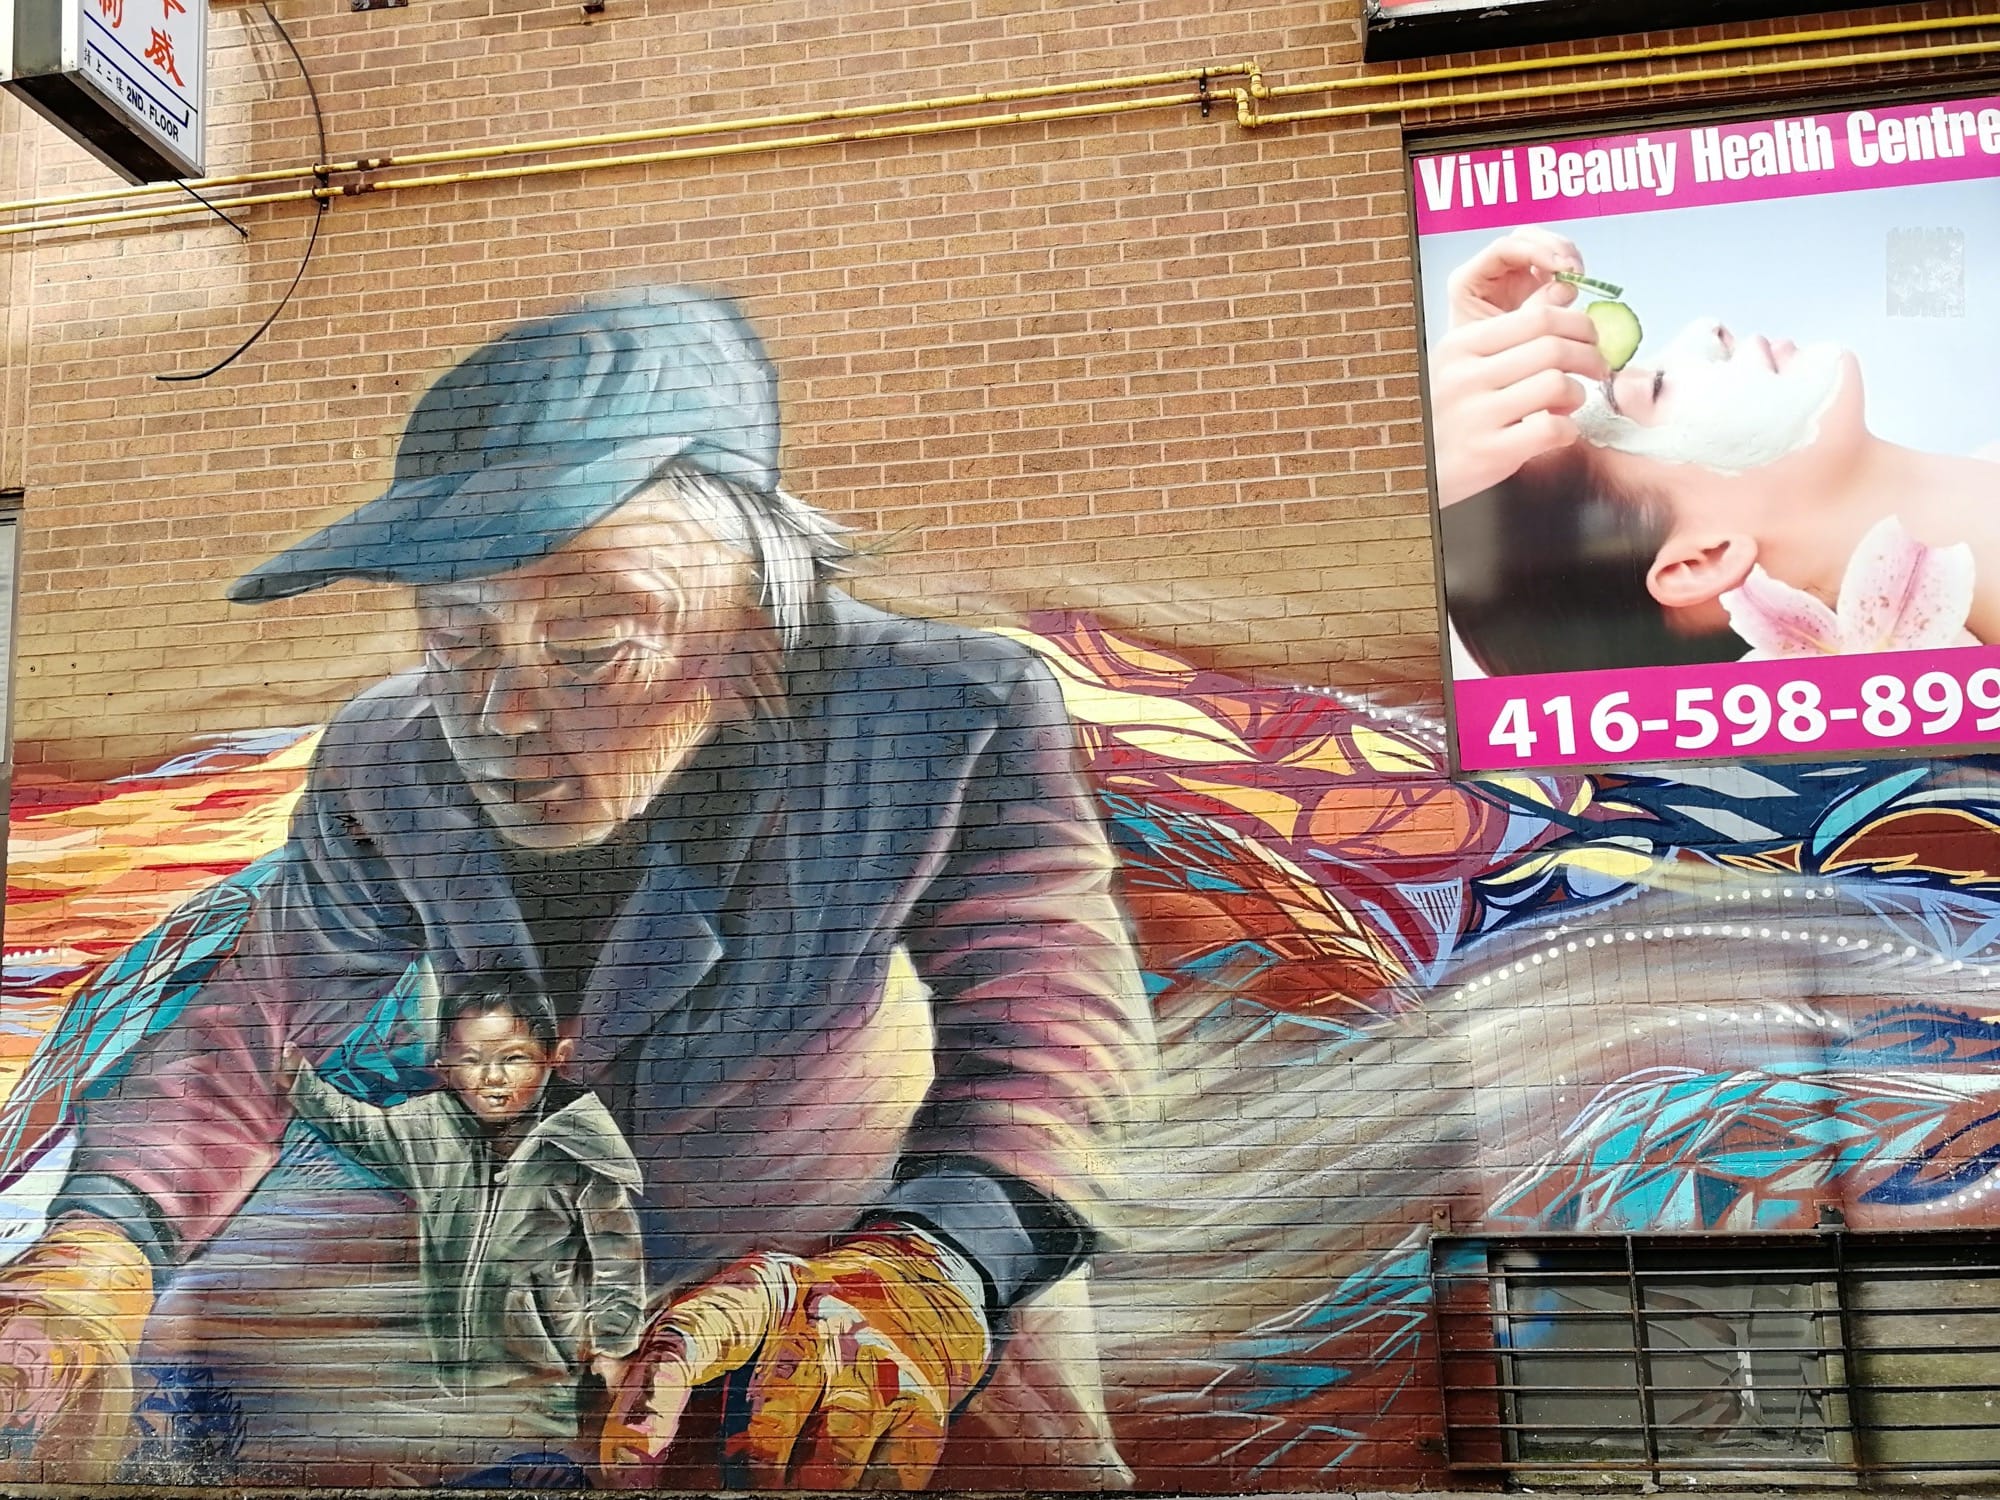 Graffiti 2354  captured by Rabot in Toronto Canada